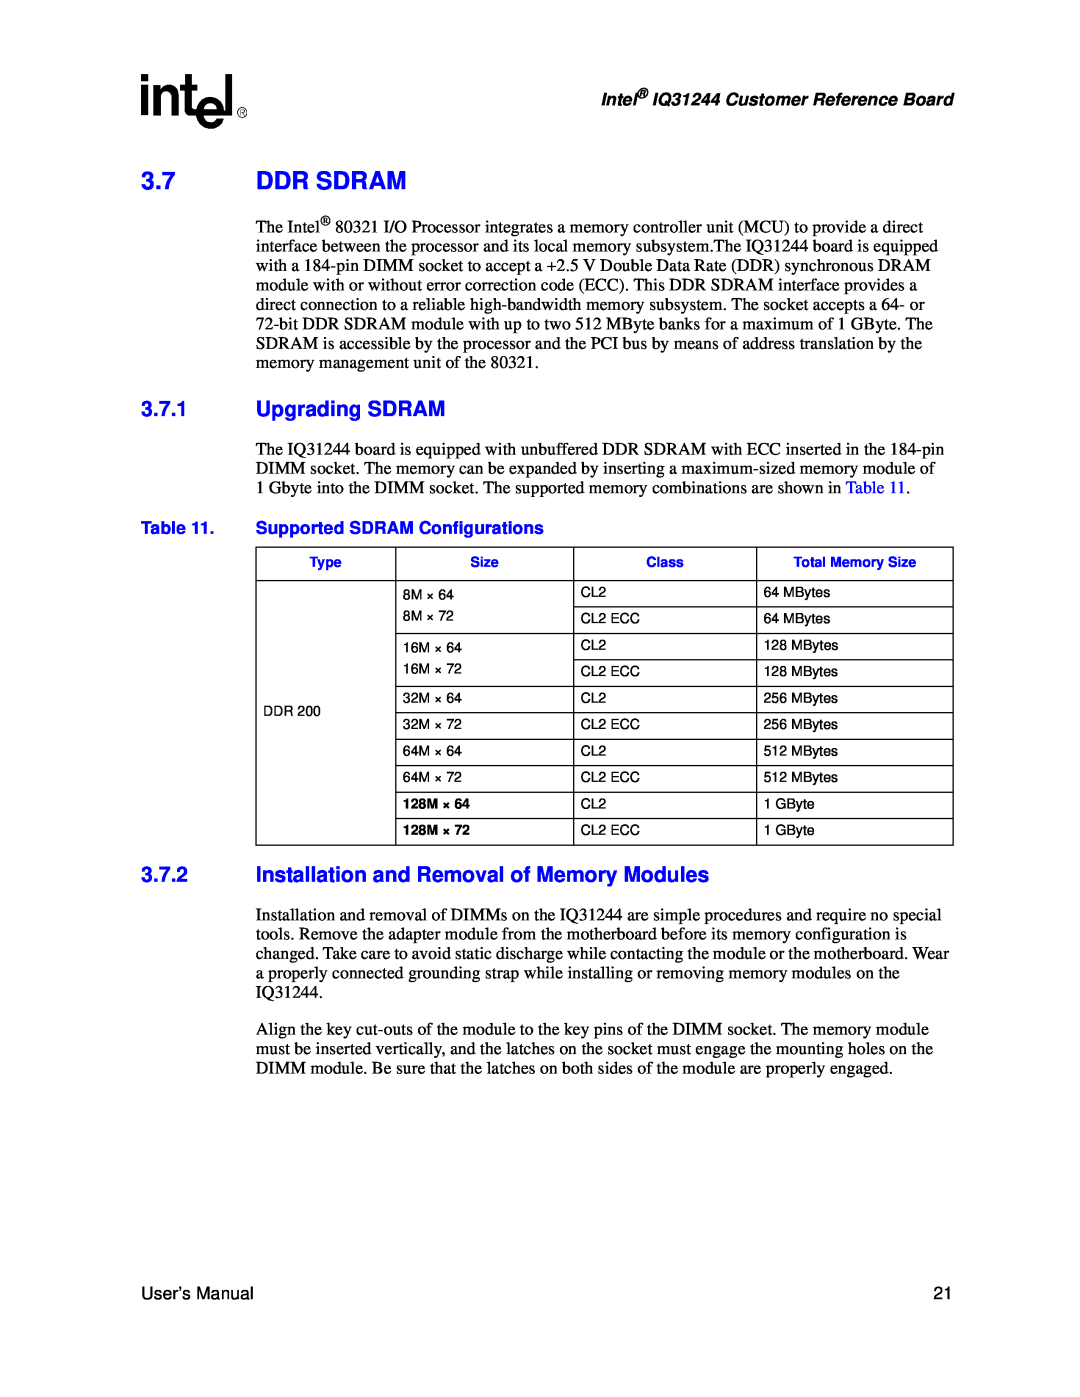 Intel IQ31244 user manual 3.7DDR SDRAM, 3.7.1Upgrading SDRAM, 3.7.2Installation and Removal of Memory Modules 